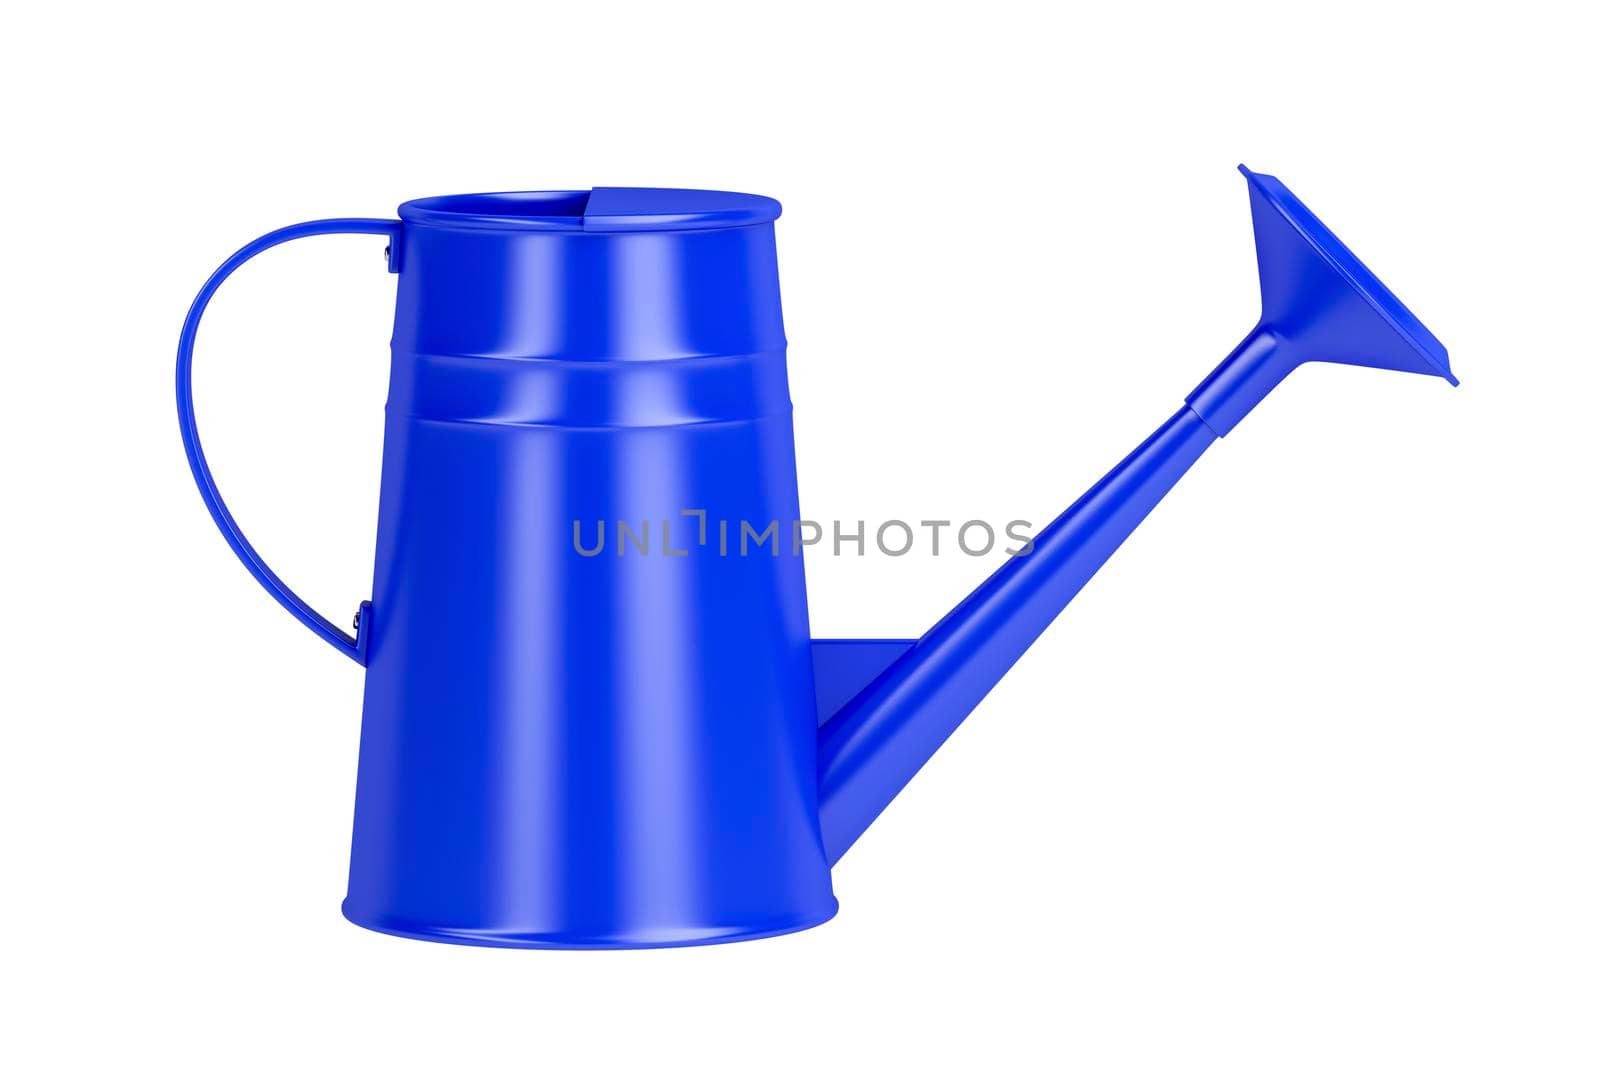 Blue watering can, side view by magraphics